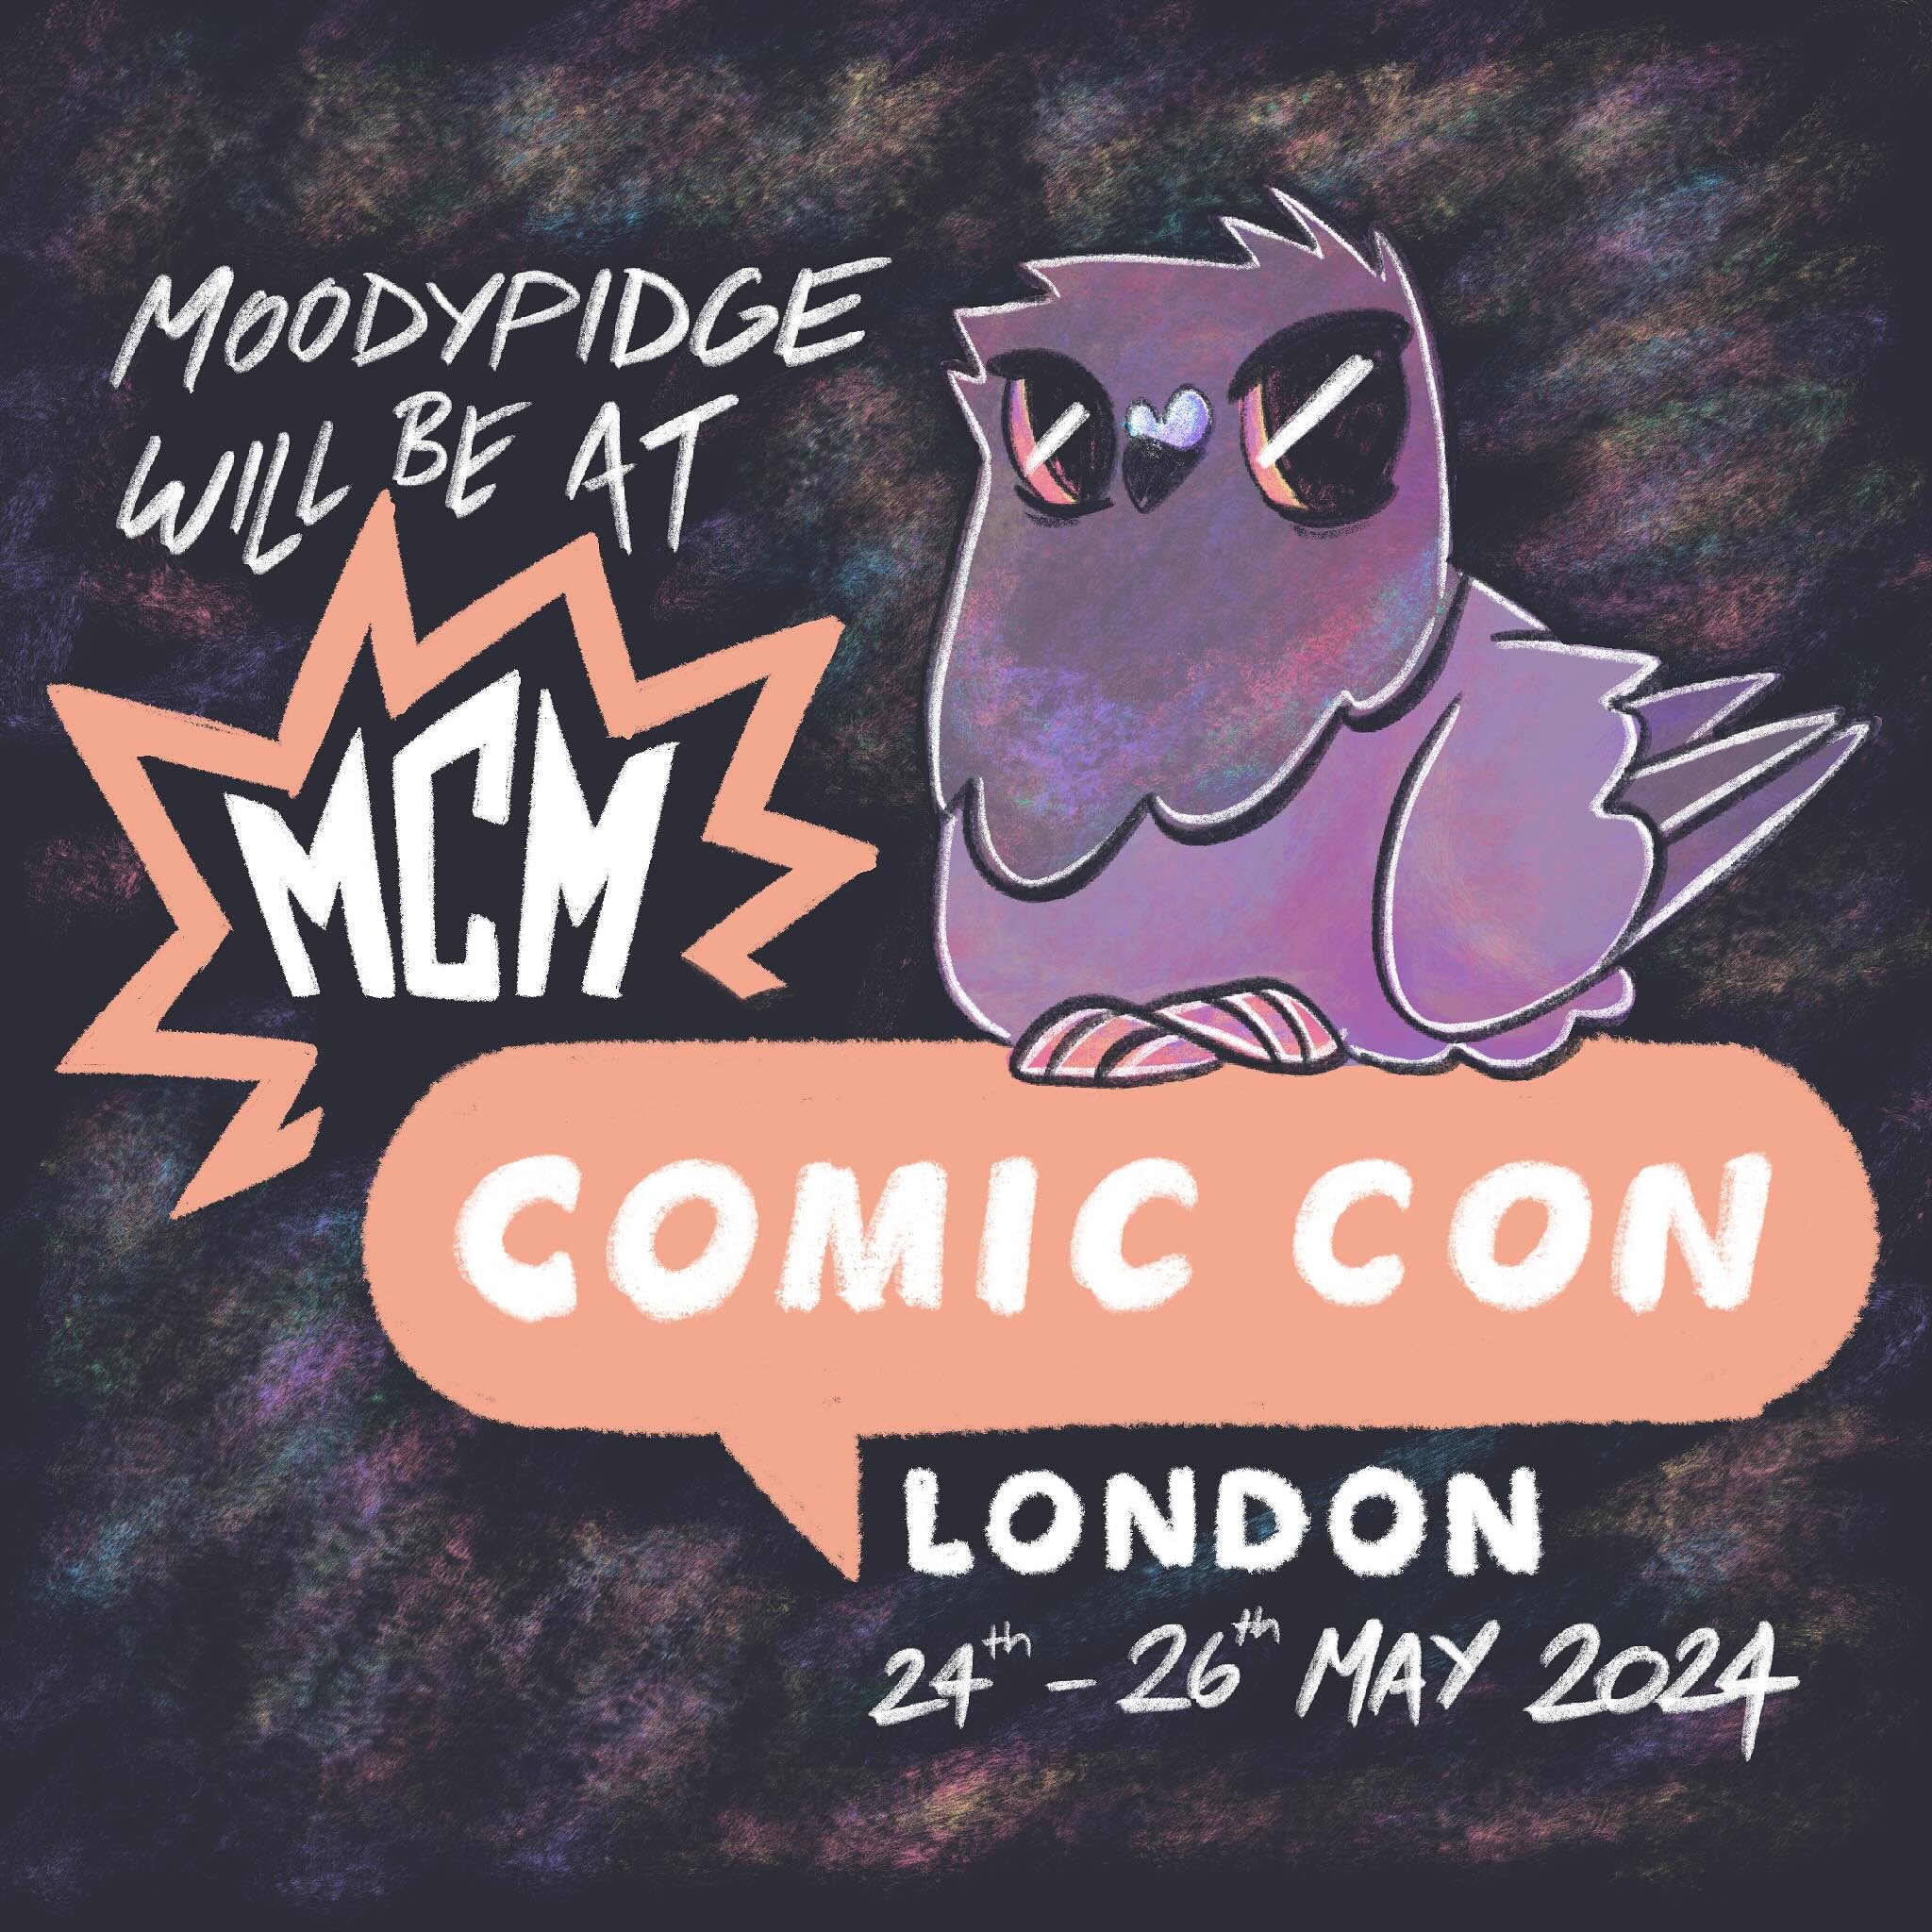 The pigeons are flying to @mcmcomiccon London this May! I had a great time at the event in October so I&rsquo;m excited to see how it&rsquo;ll be earlier in the year. Lemme know if you&rsquo;ll be there! And DEFINITELY let me know if you&rsquo;re sel